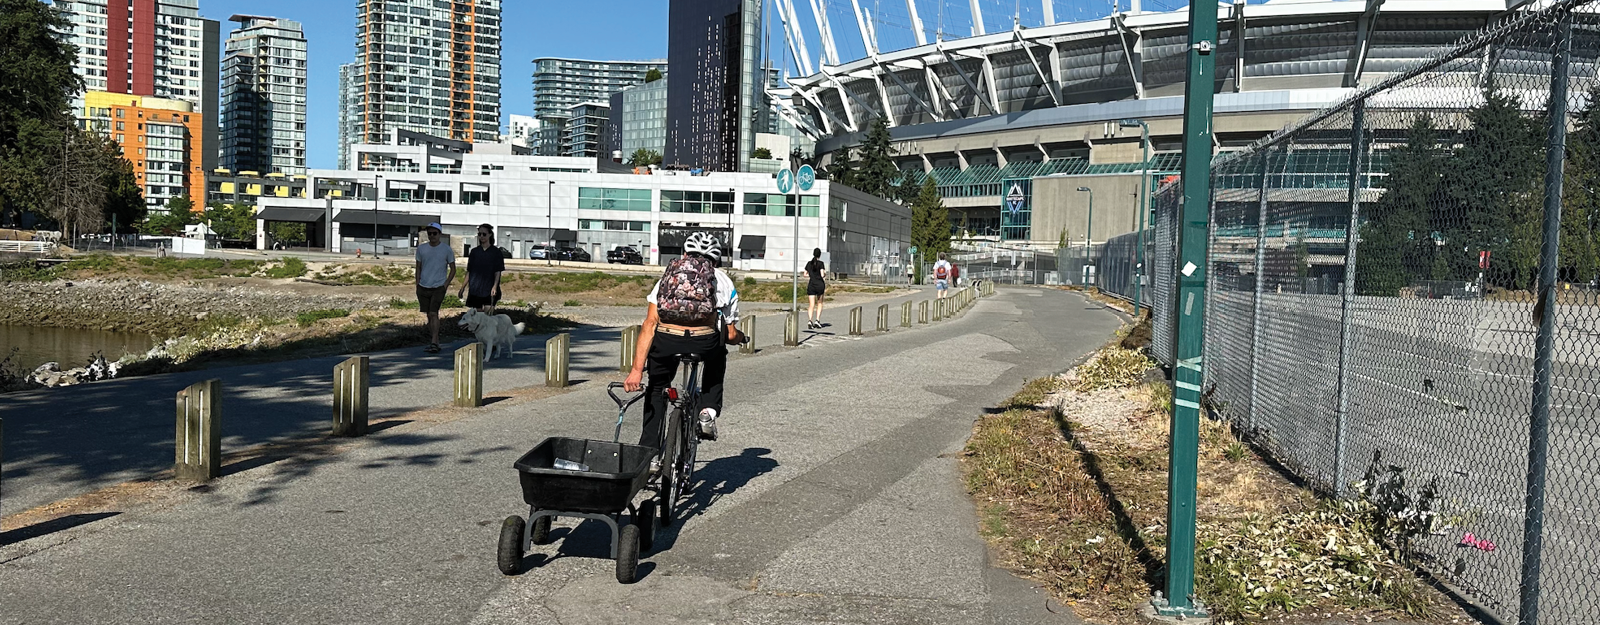 A person rides a bike on Vancouver's Seawall. They are holding on to the handle of a wagon as they ride.